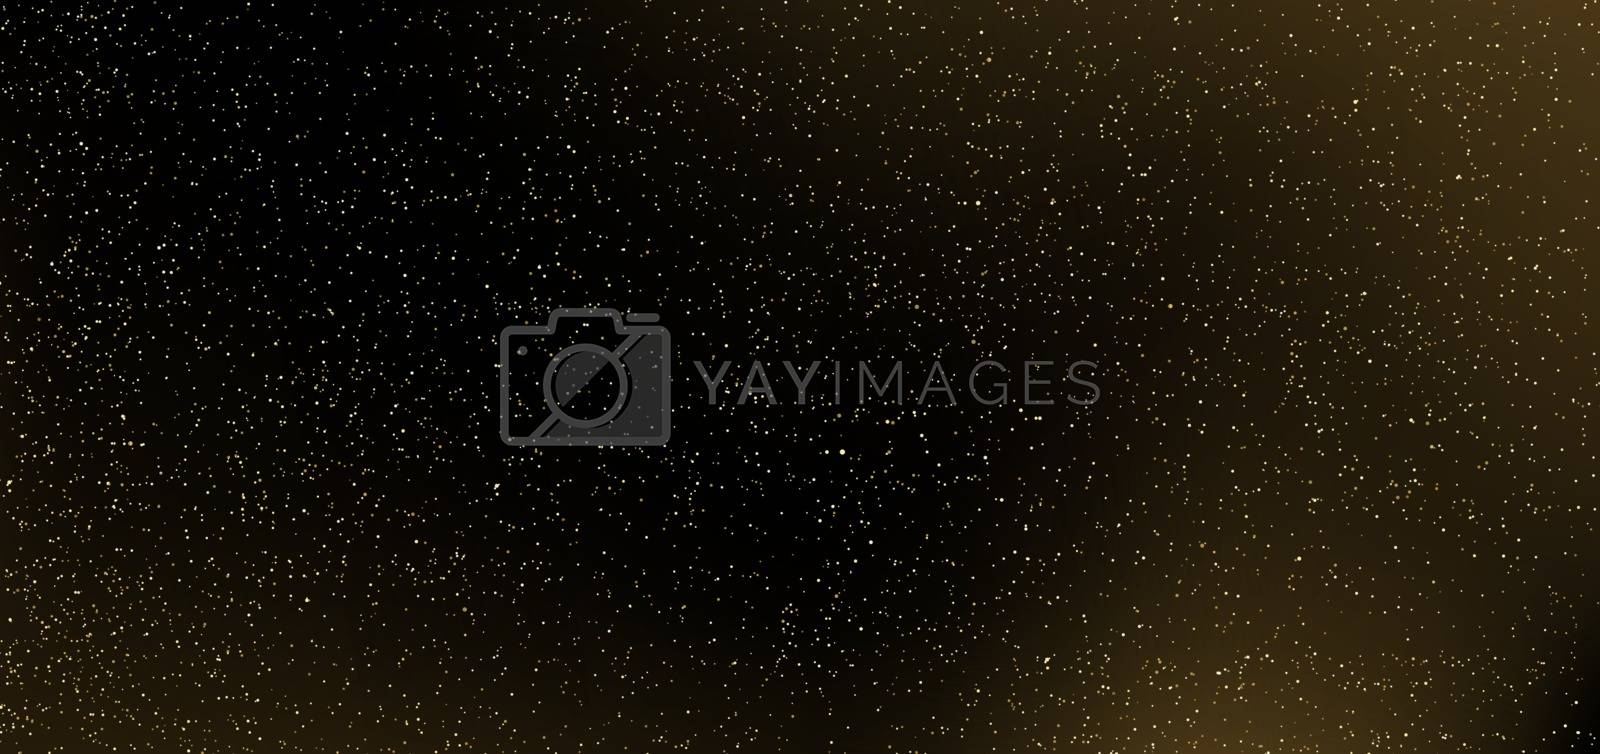 Royalty free image of Gold glitter on black background. Many golden dots particles in  by phochi